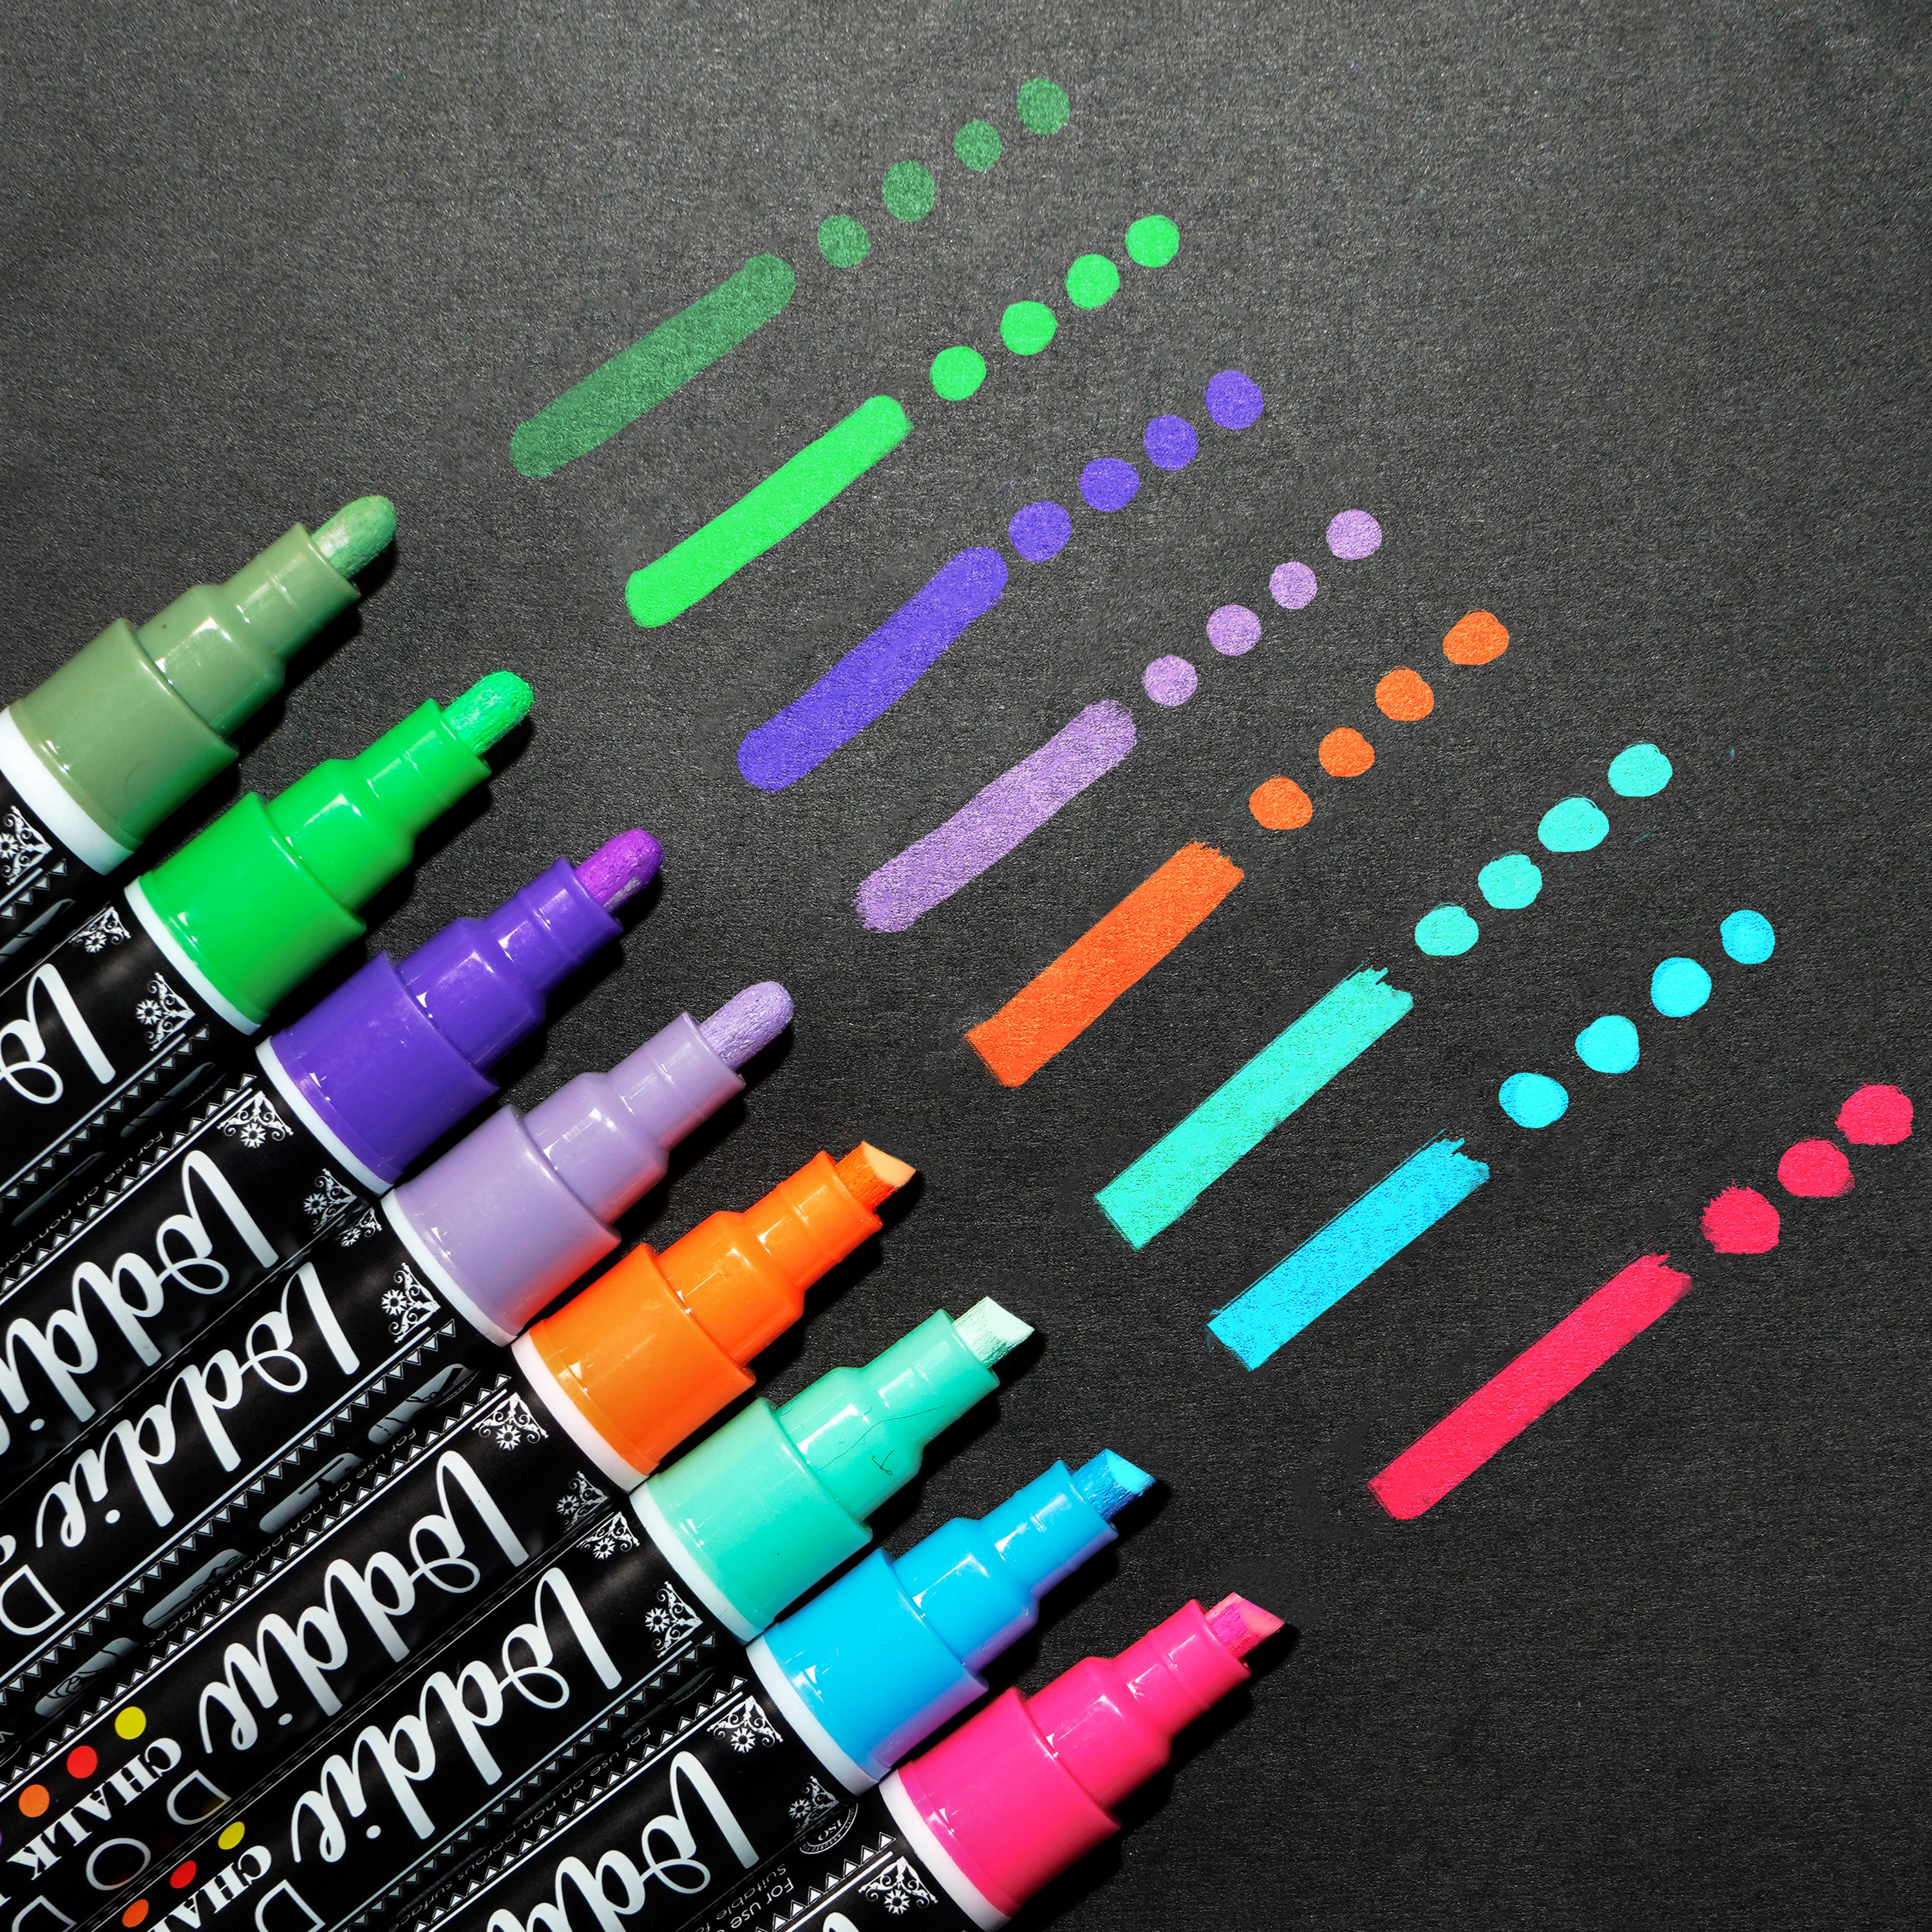 Chalk Markers by Vaci, Pack of 10 + Drawing Stencils + 16 Labels, Premium Liquid Chalkboard